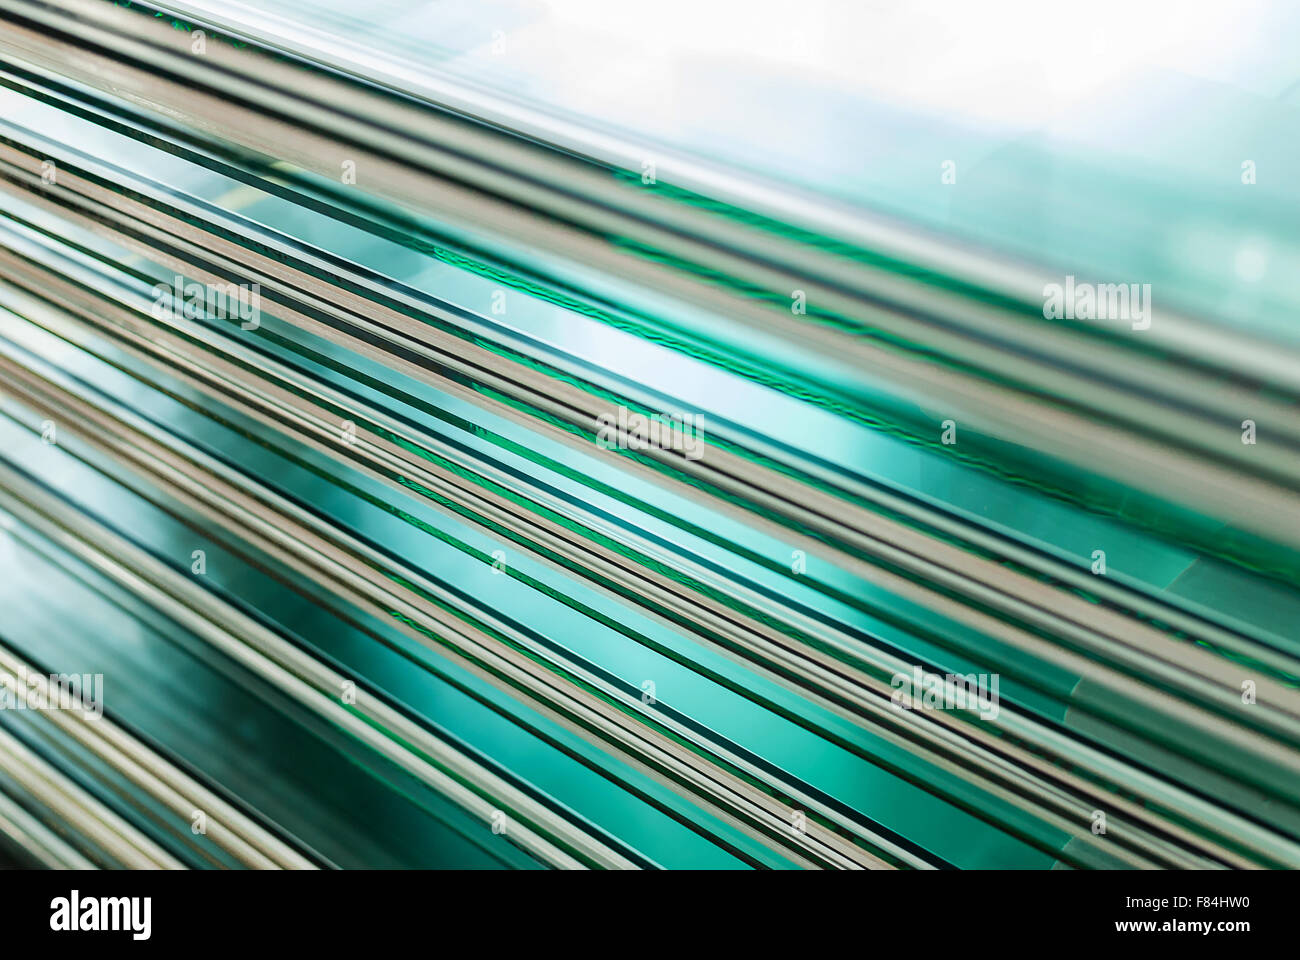 Sheets Of Factory Manufacturing Tempered Clear Float Glass Panels Cut To  Size Stock Photo - Download Image Now - iStock